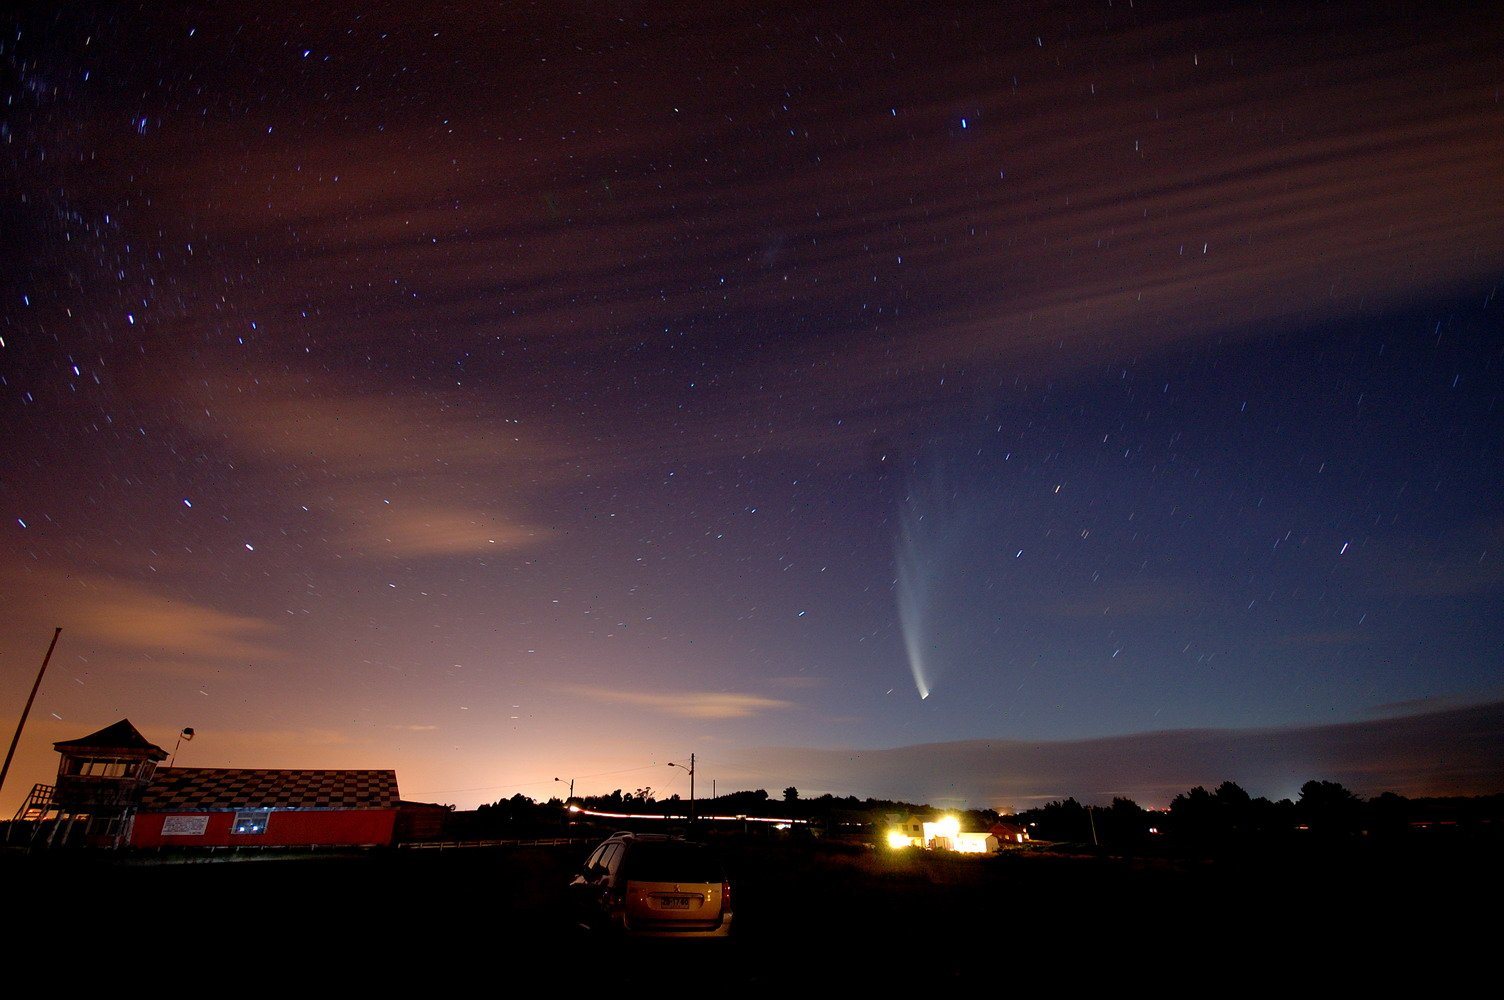 The Magnificent Tail of Comet McNaught - Comet C/2006 P1 